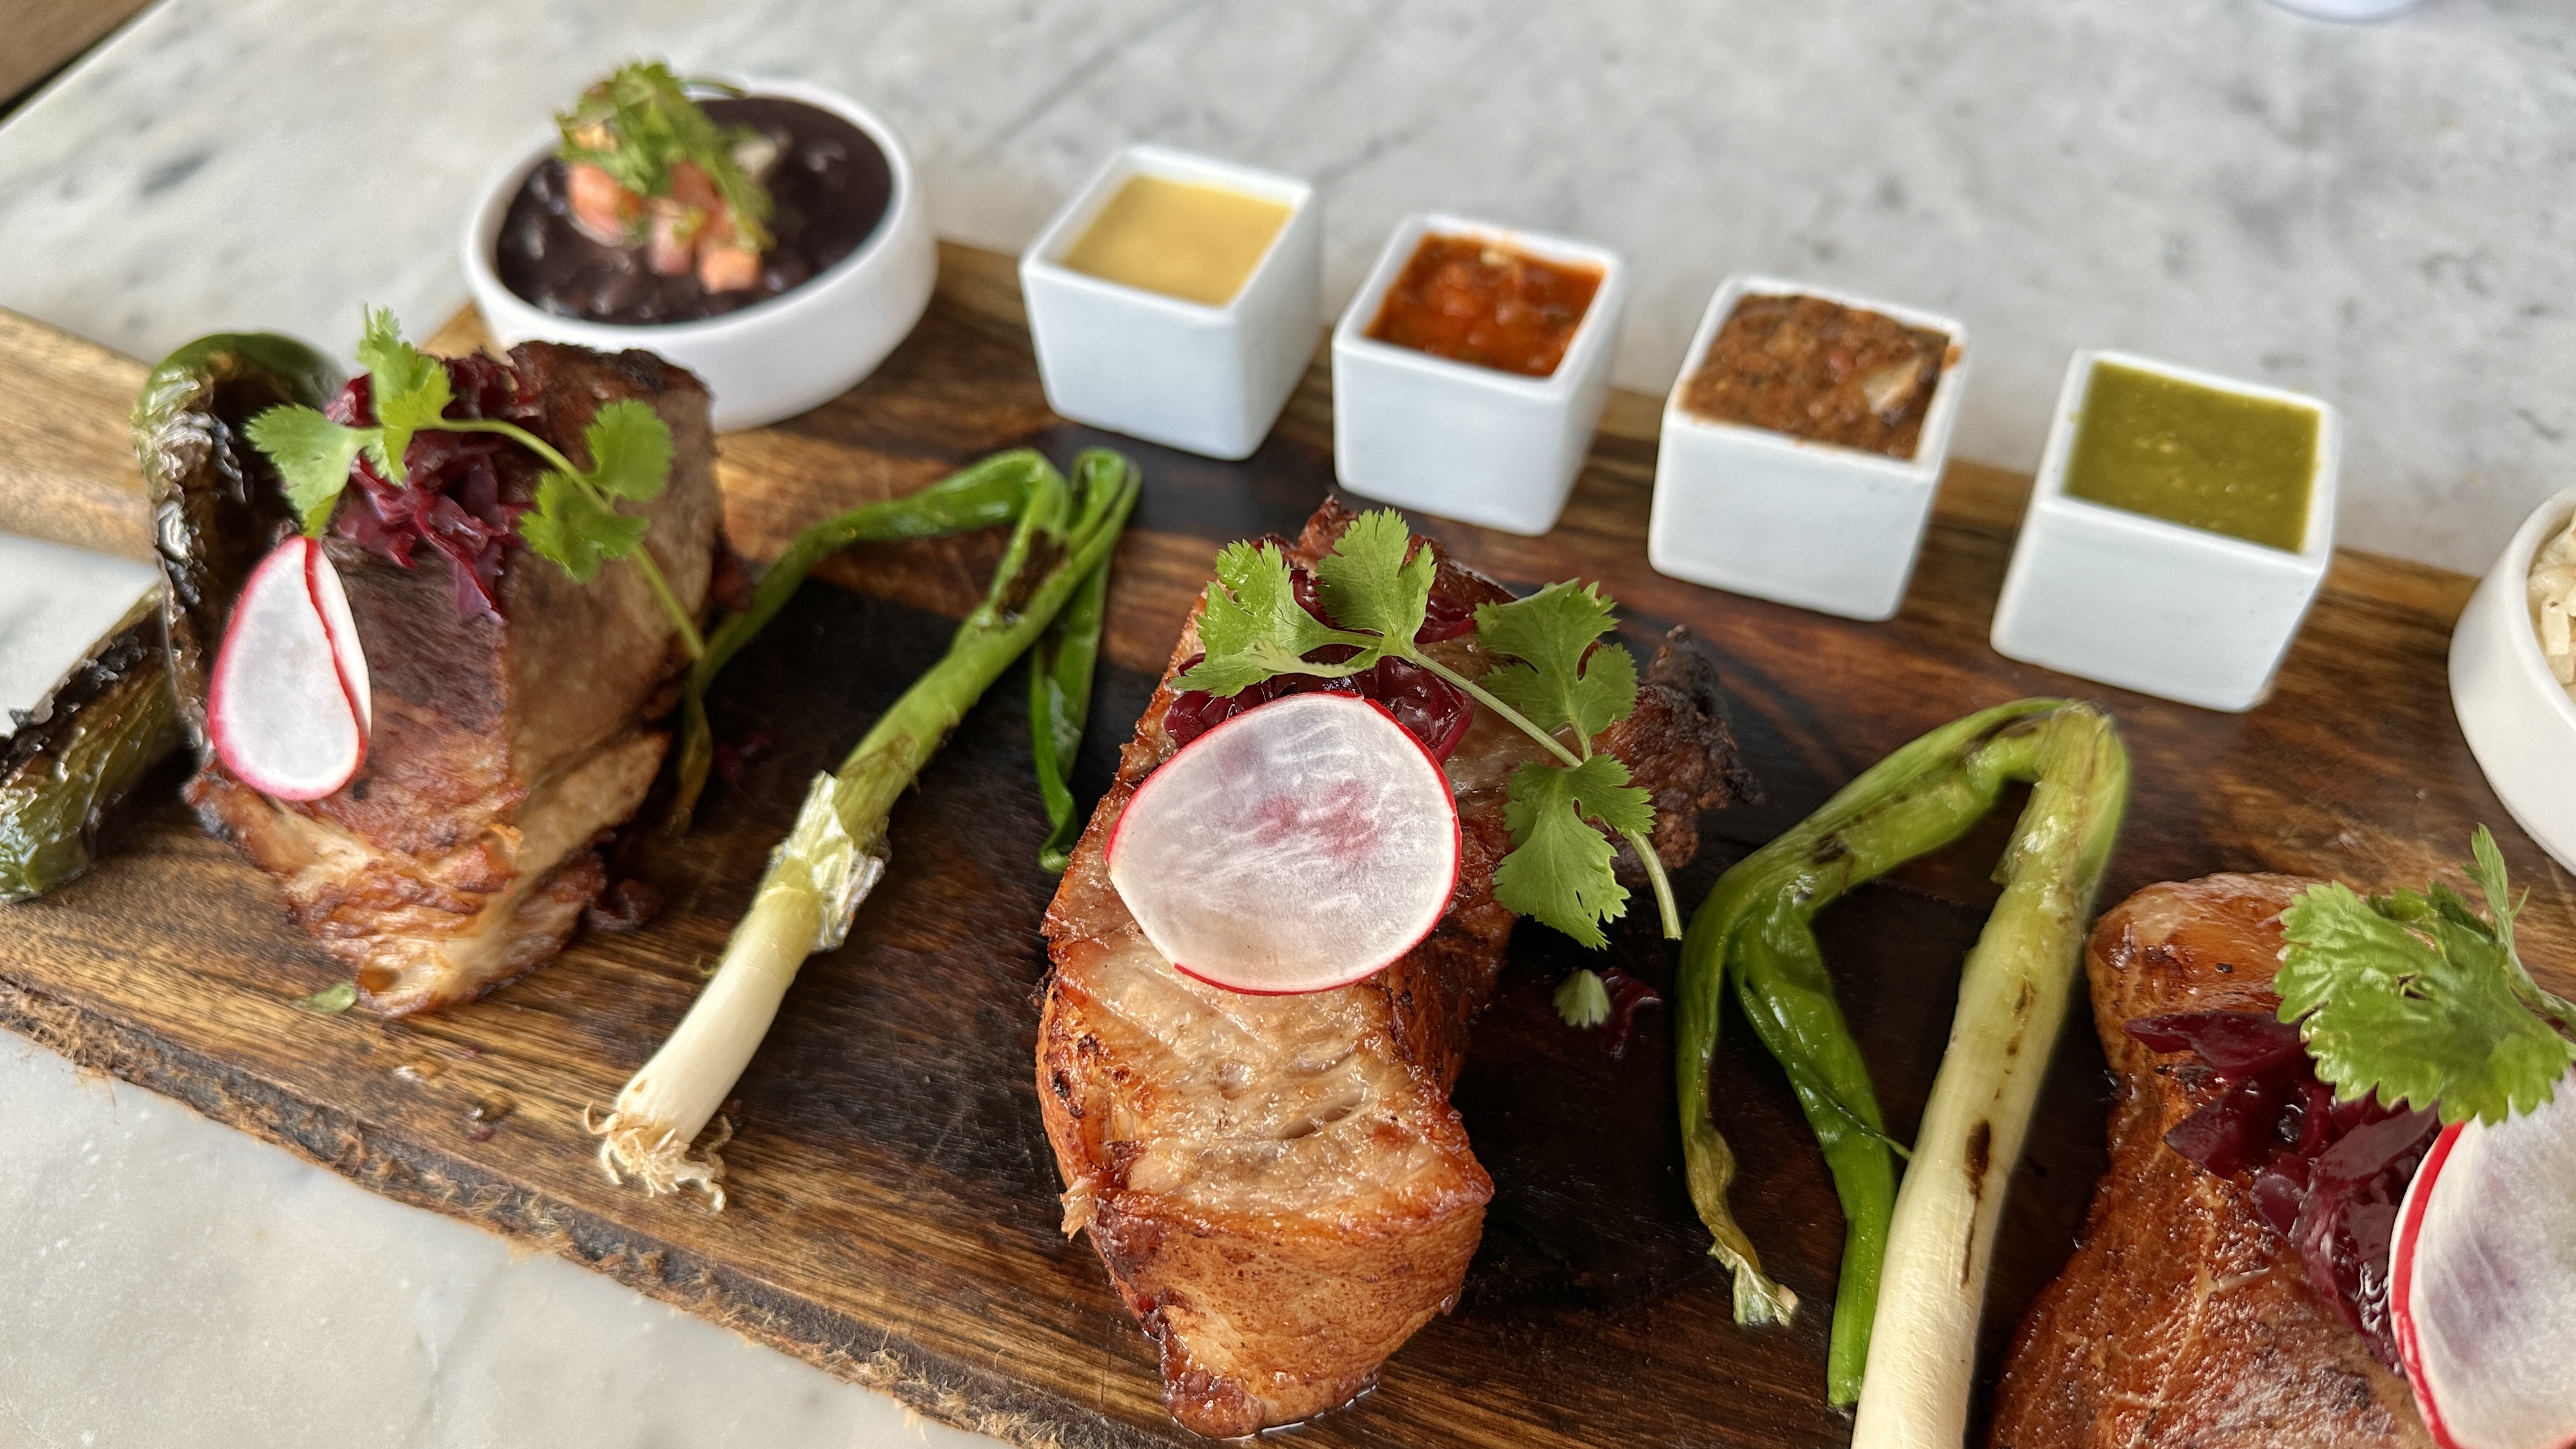 A selection of meats served on a wooden board with sauces and sides.